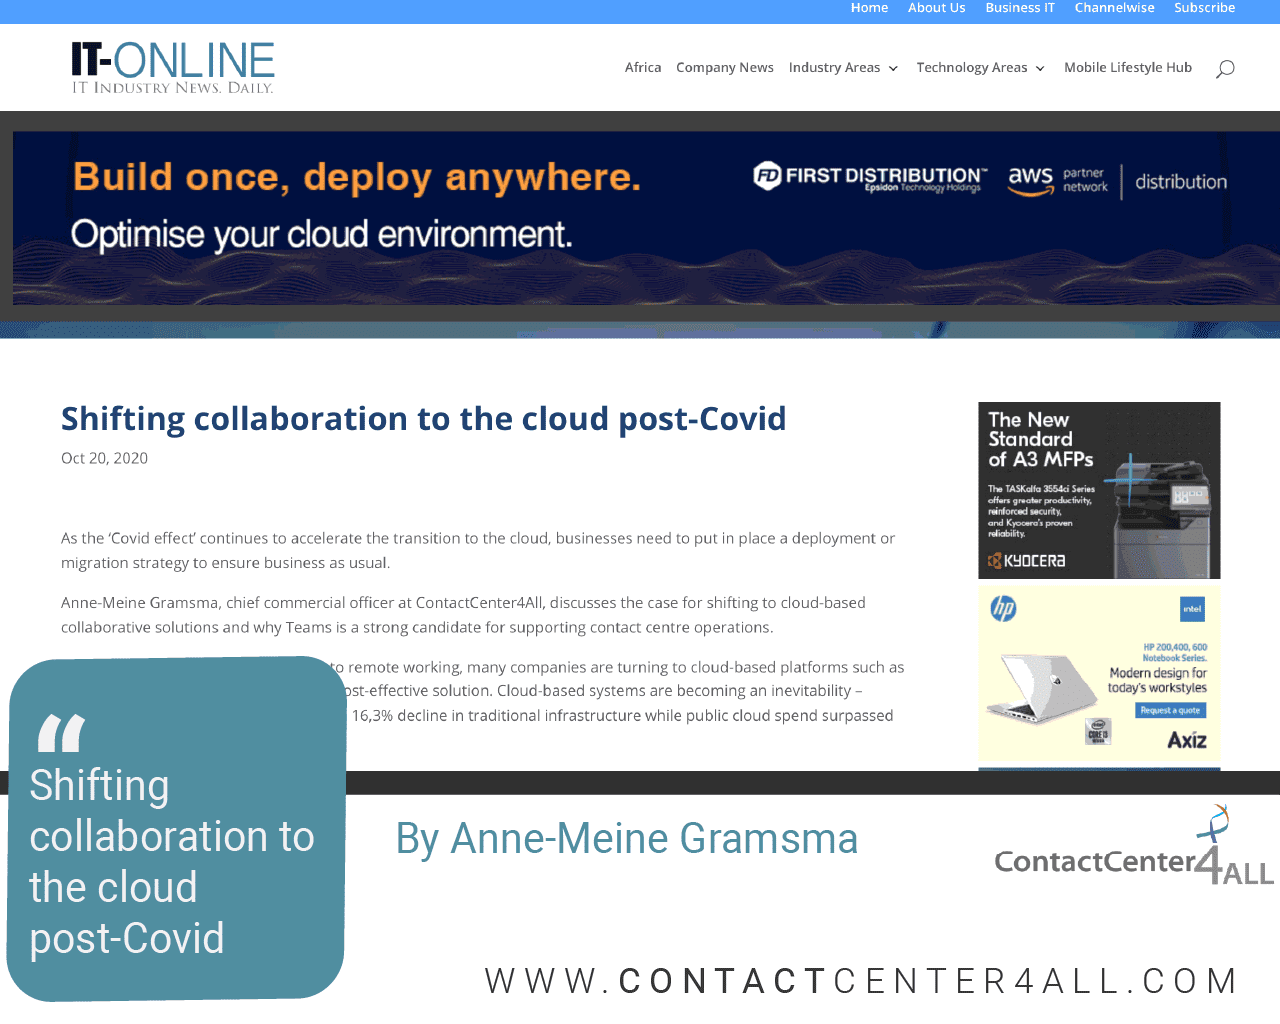 Shifting collaboration to the cloud post-Covid